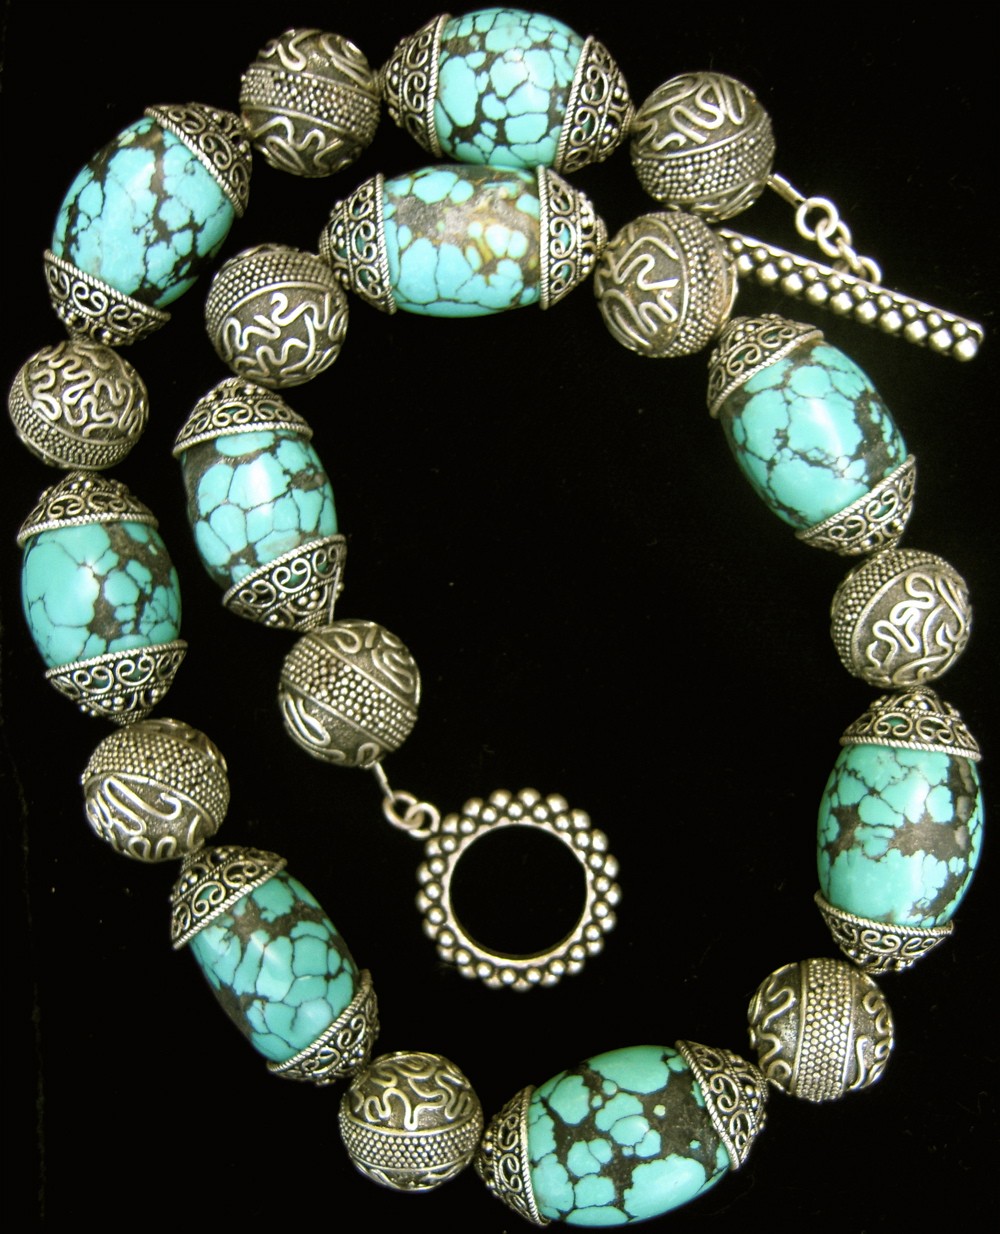 Turquoise nuggets necklace